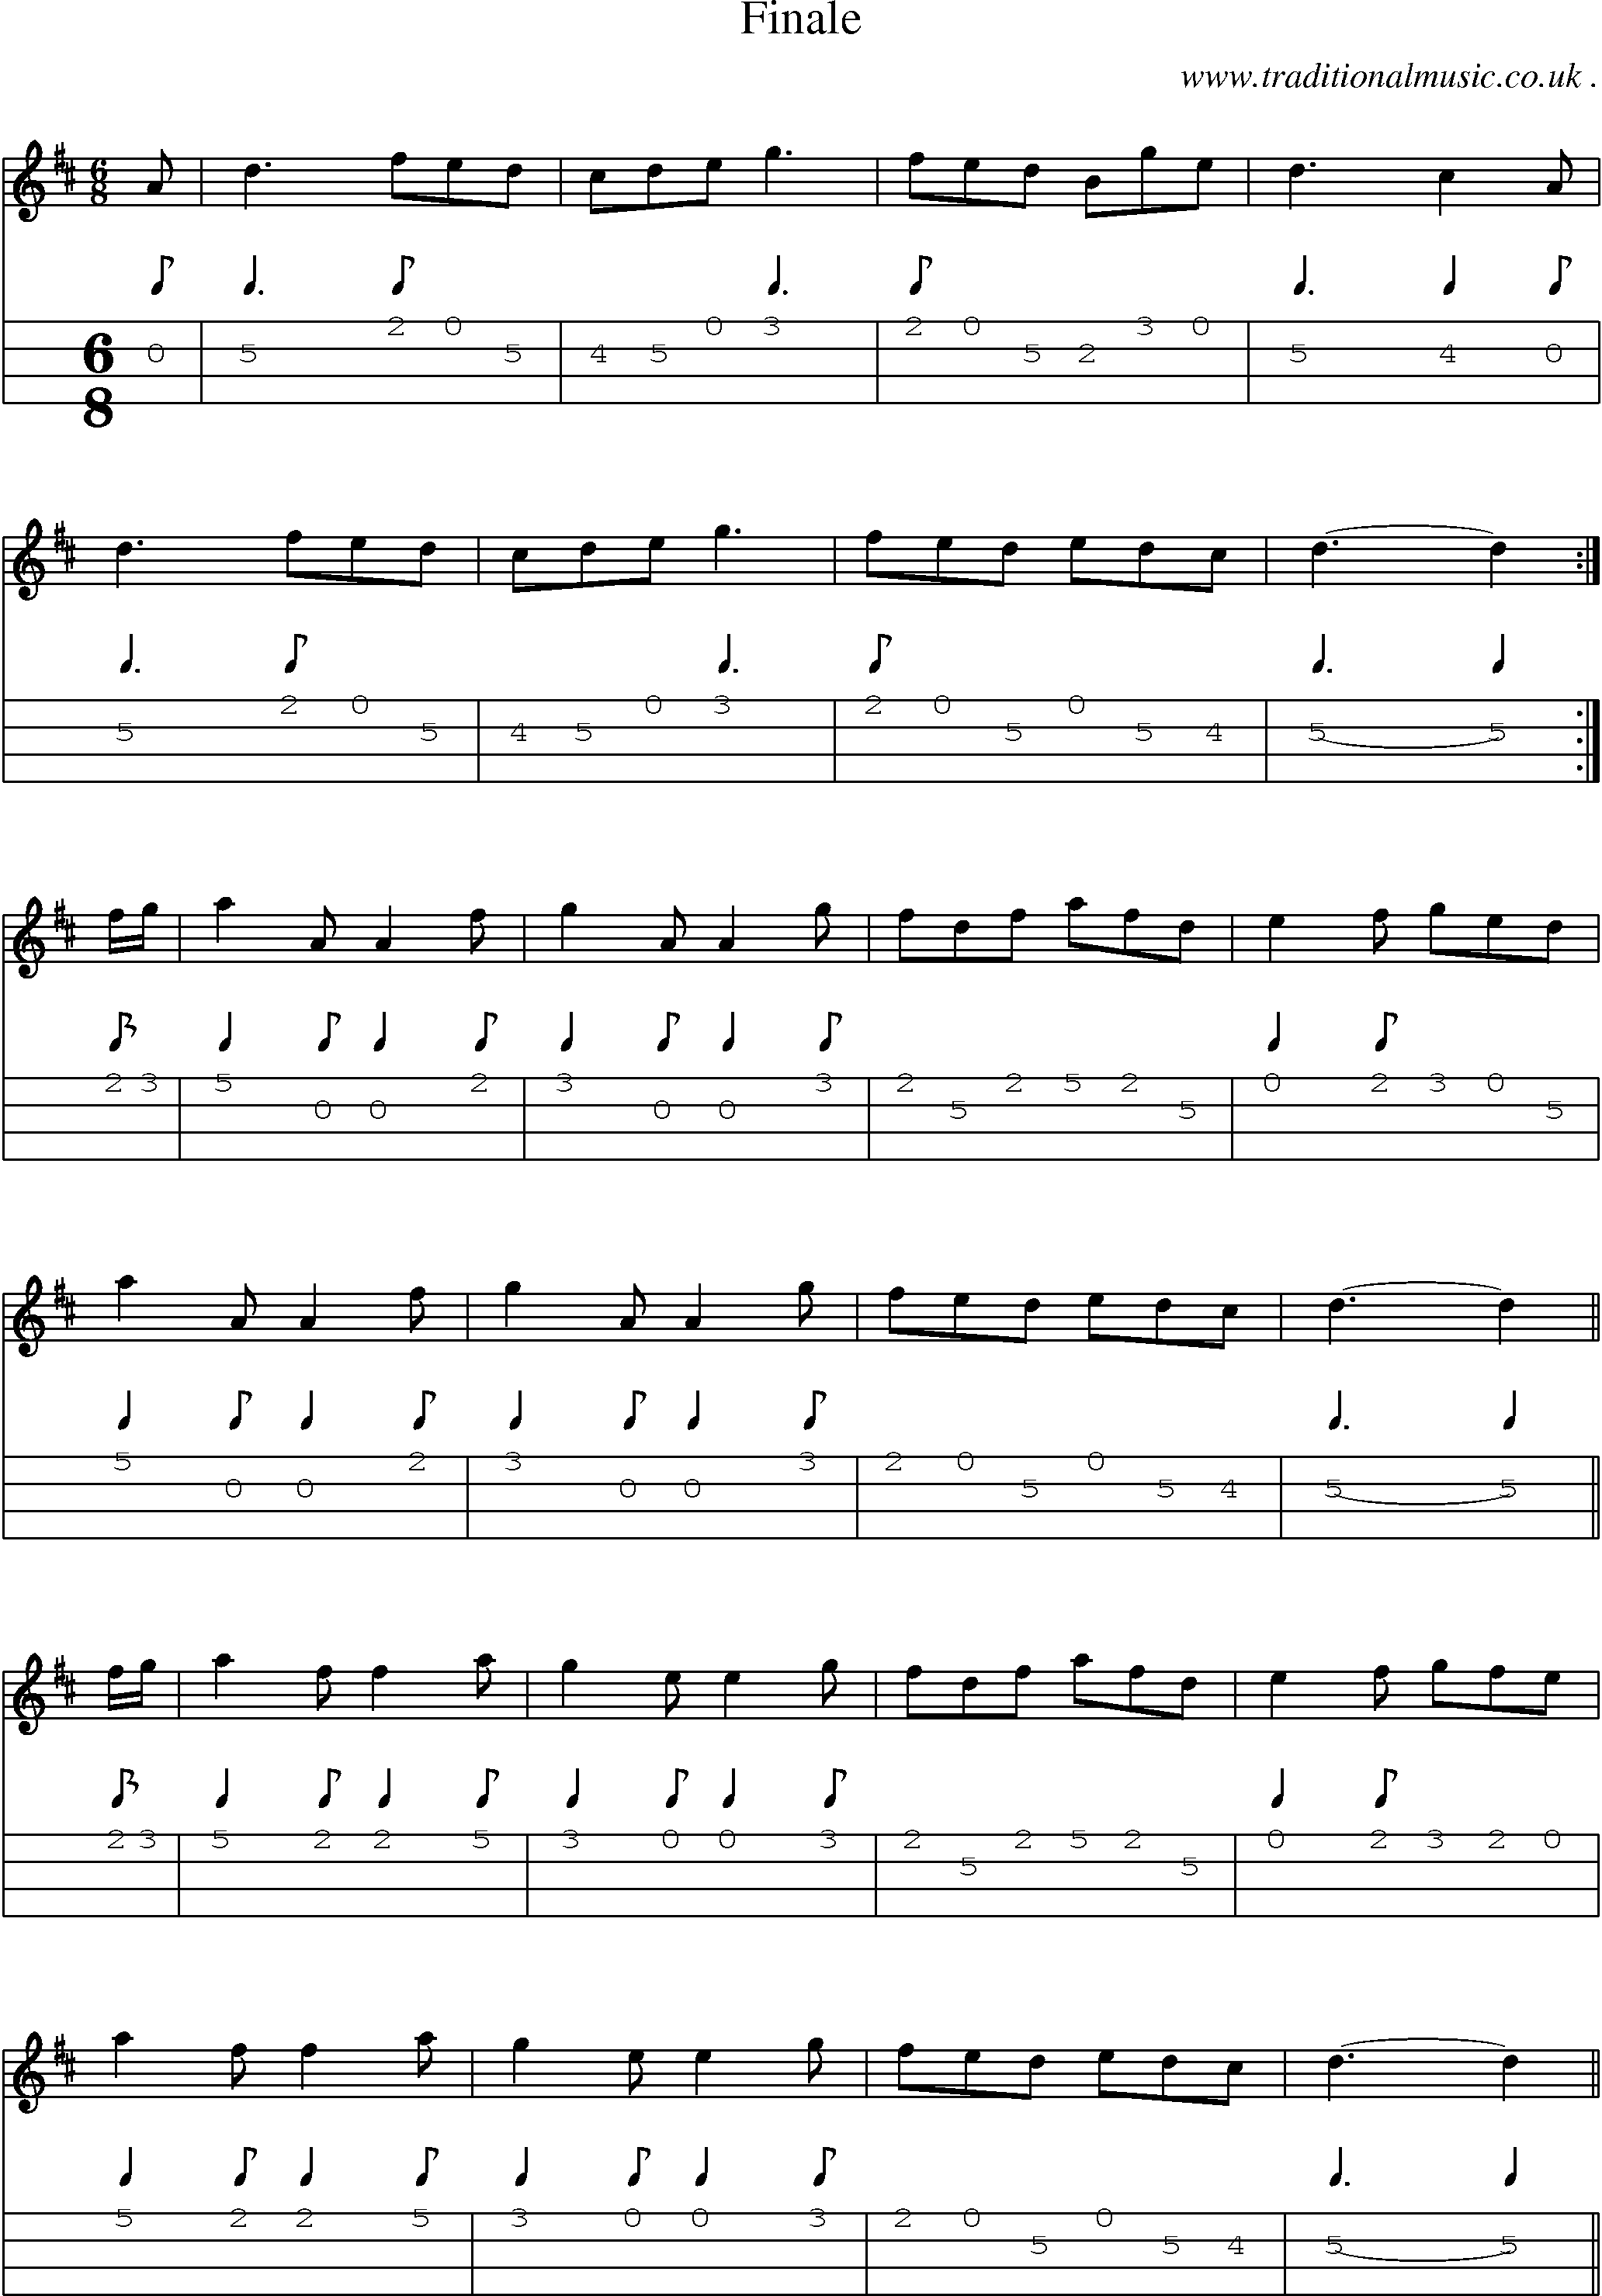 Sheet-Music and Mandolin Tabs for Finale